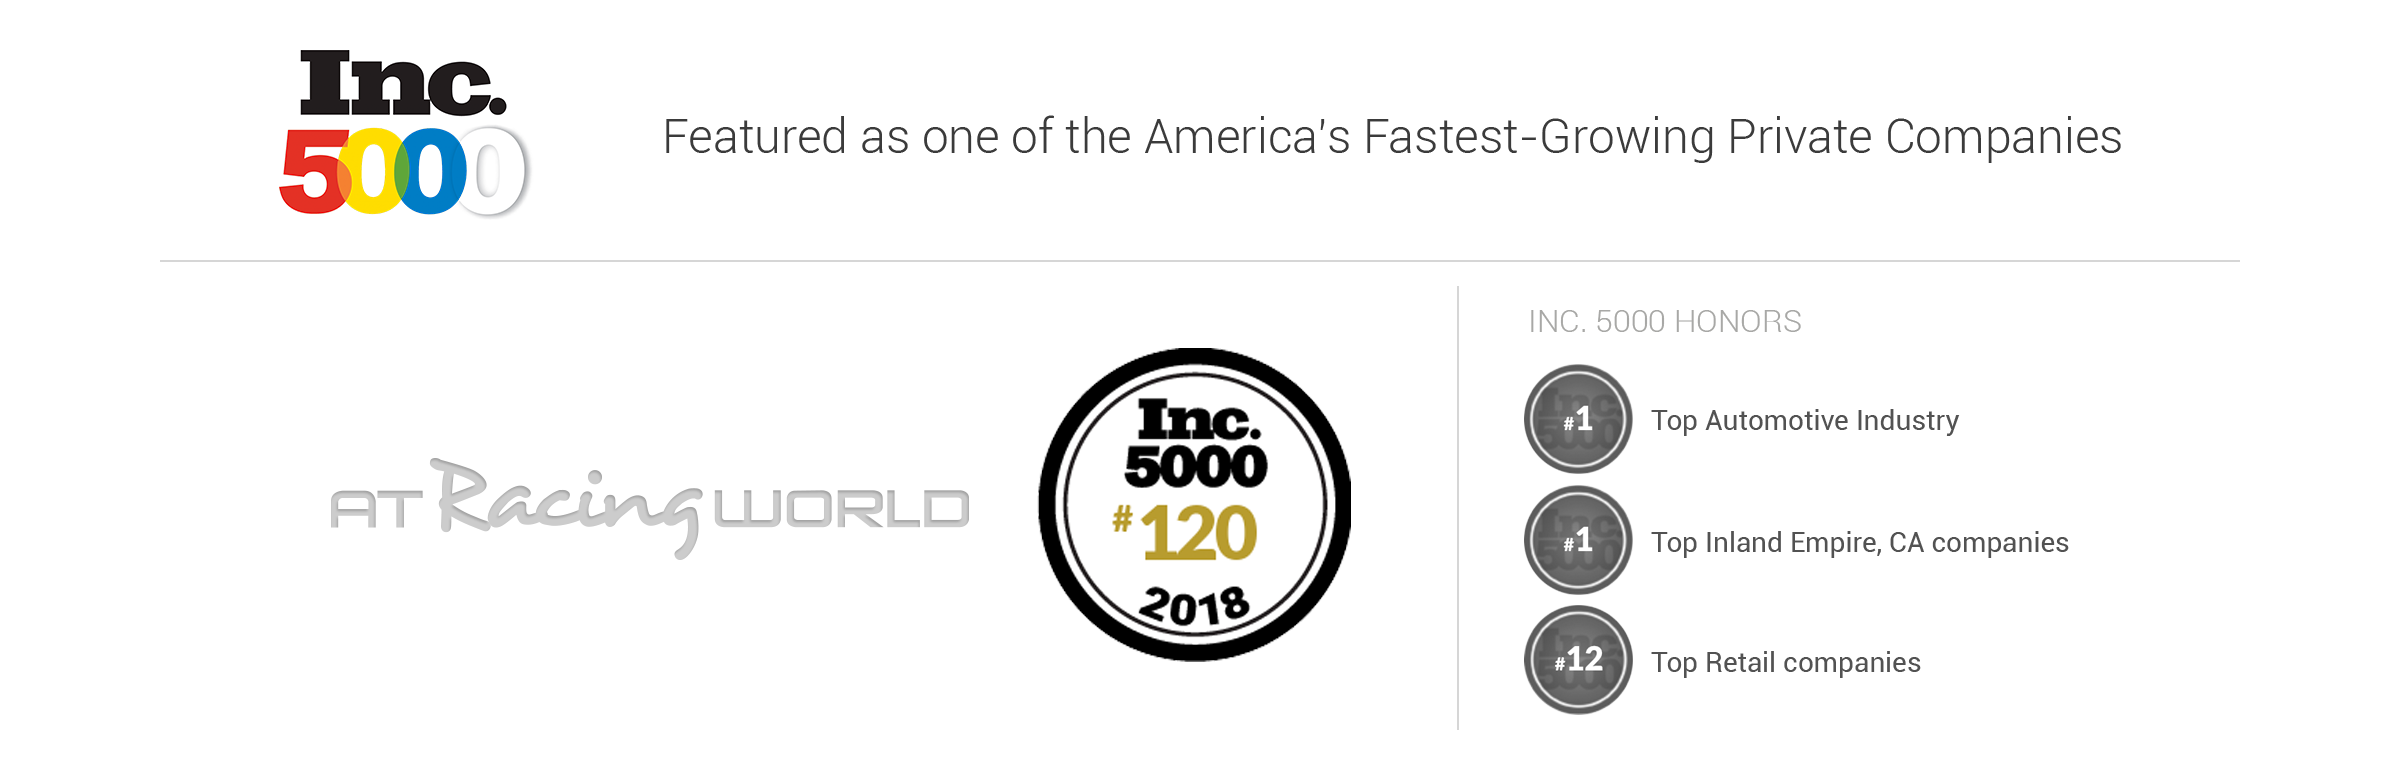 AT Racing World Featured In The 37th Annual Inc 5000. List Of America’s Fastest-Growing Private Companies